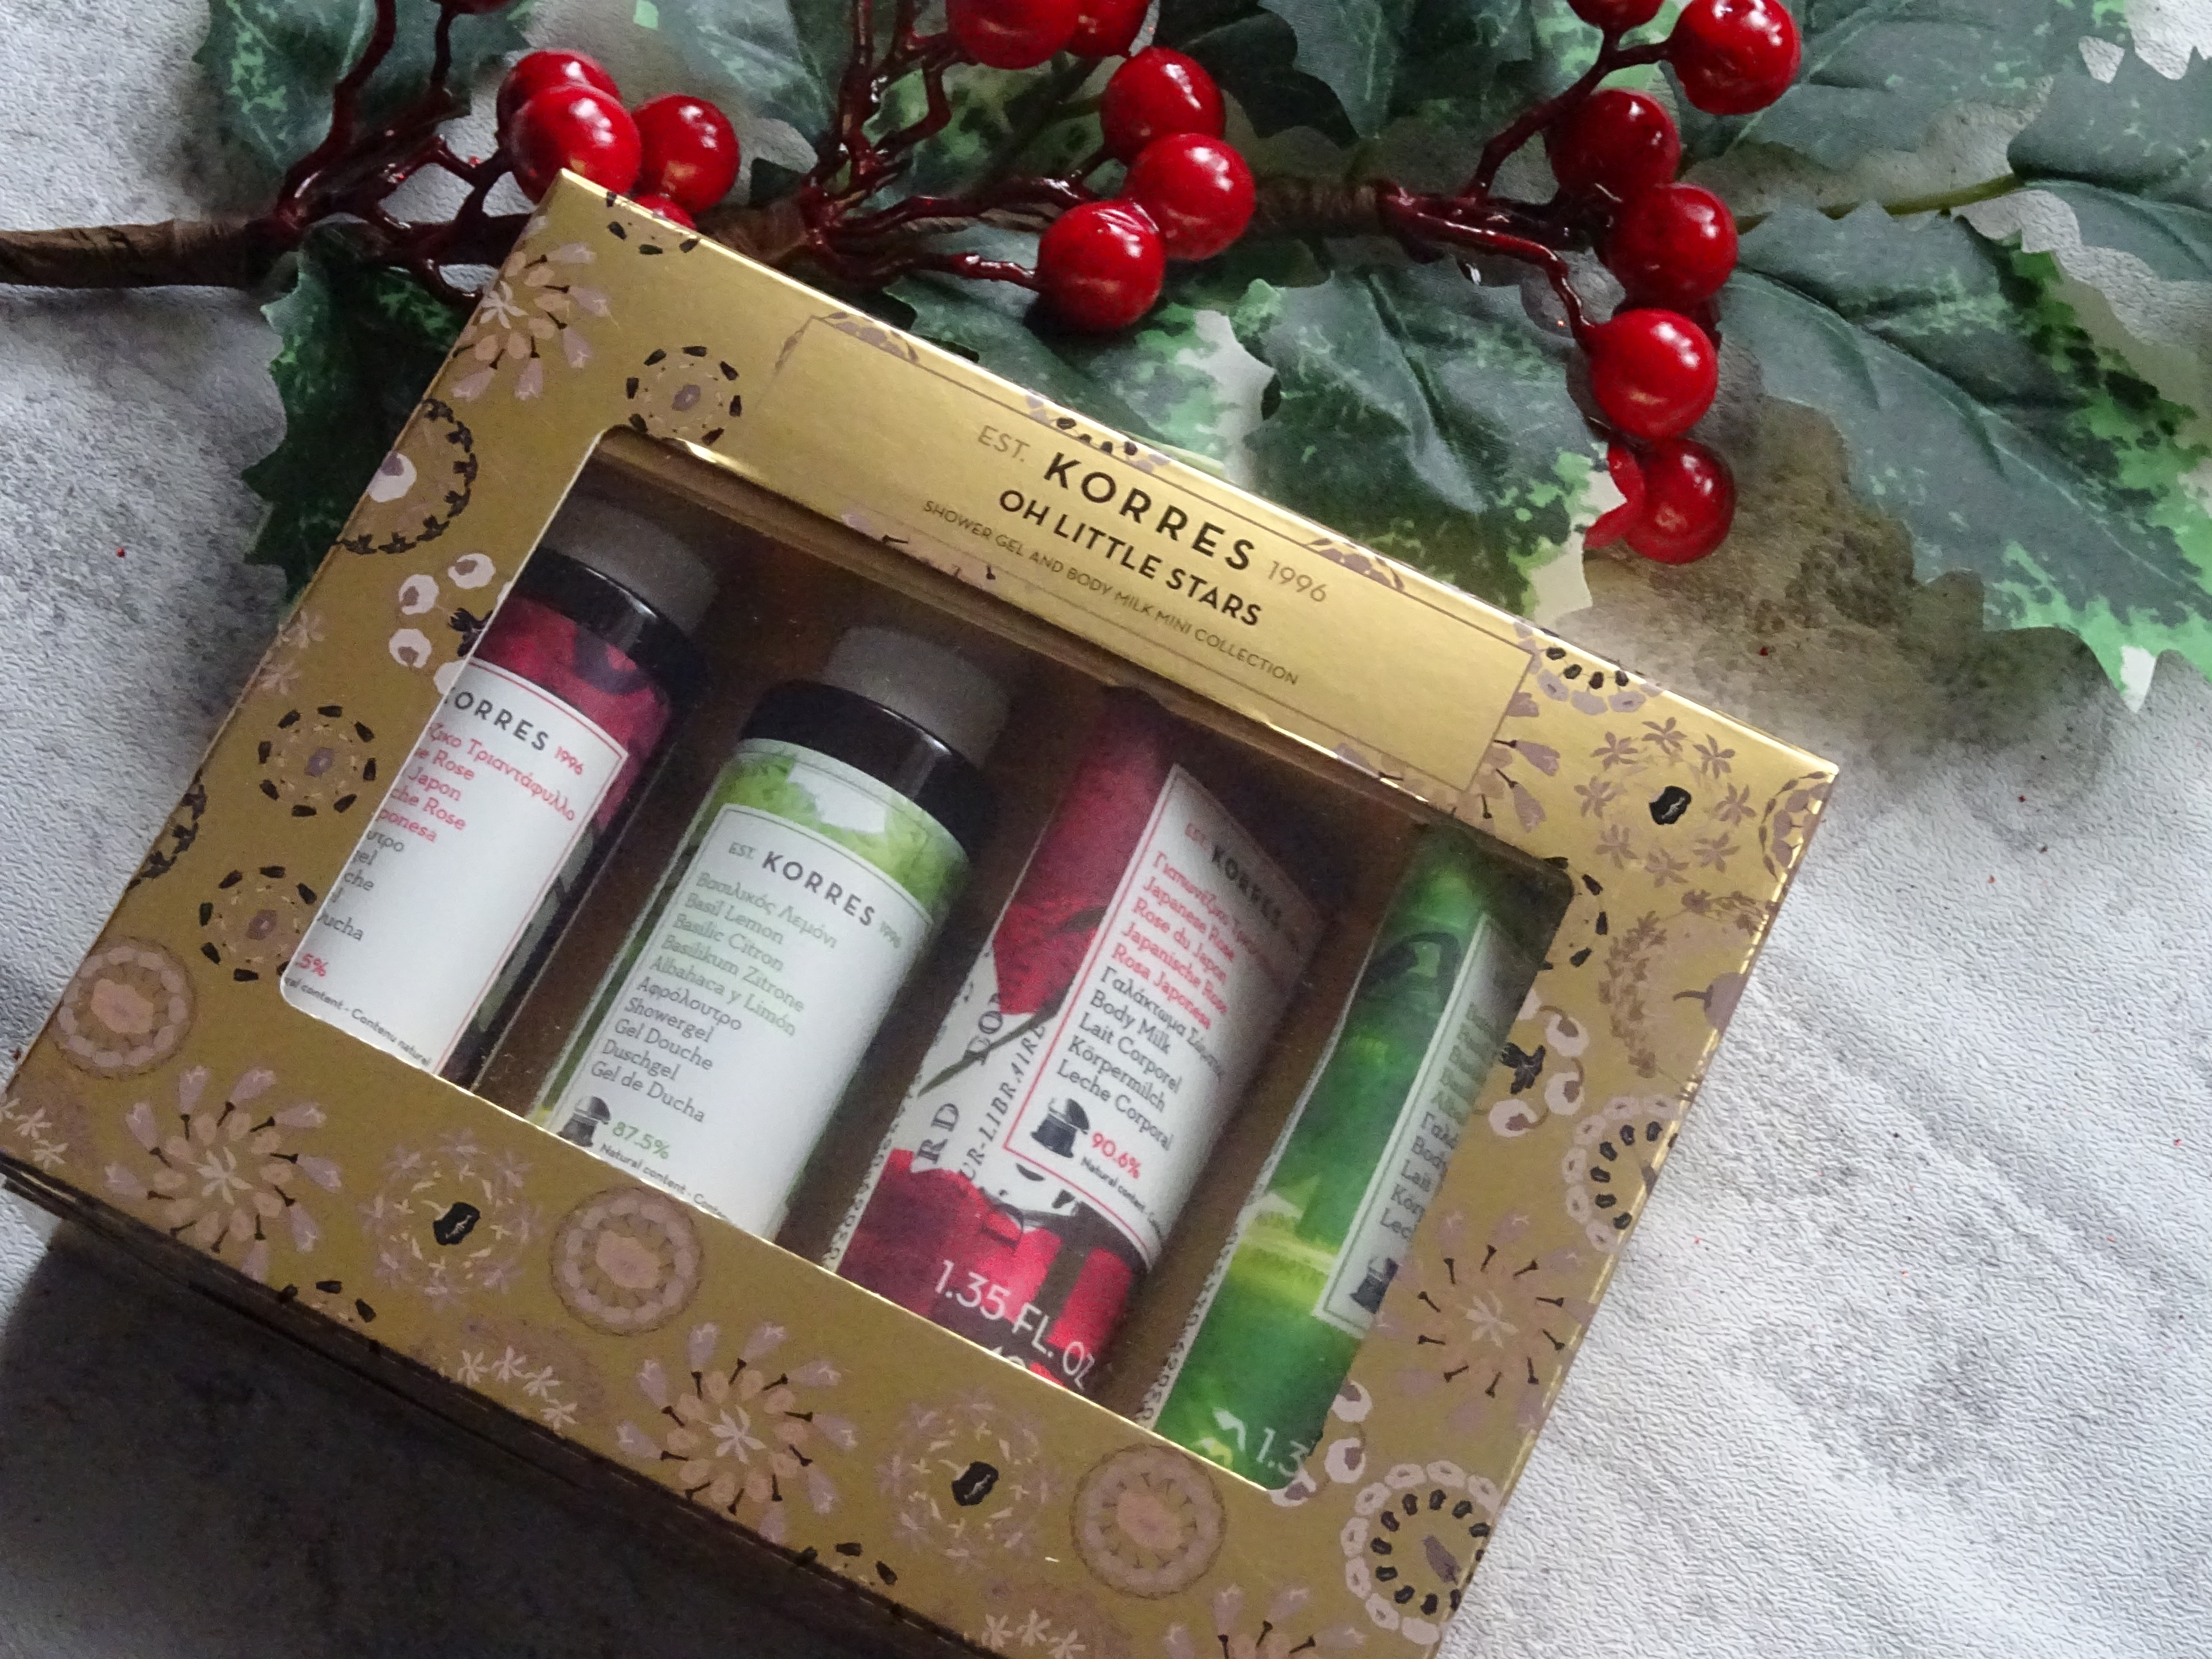 www.lifeandsoullifestyle.com – The Best Beauty Gifts this Christmas 